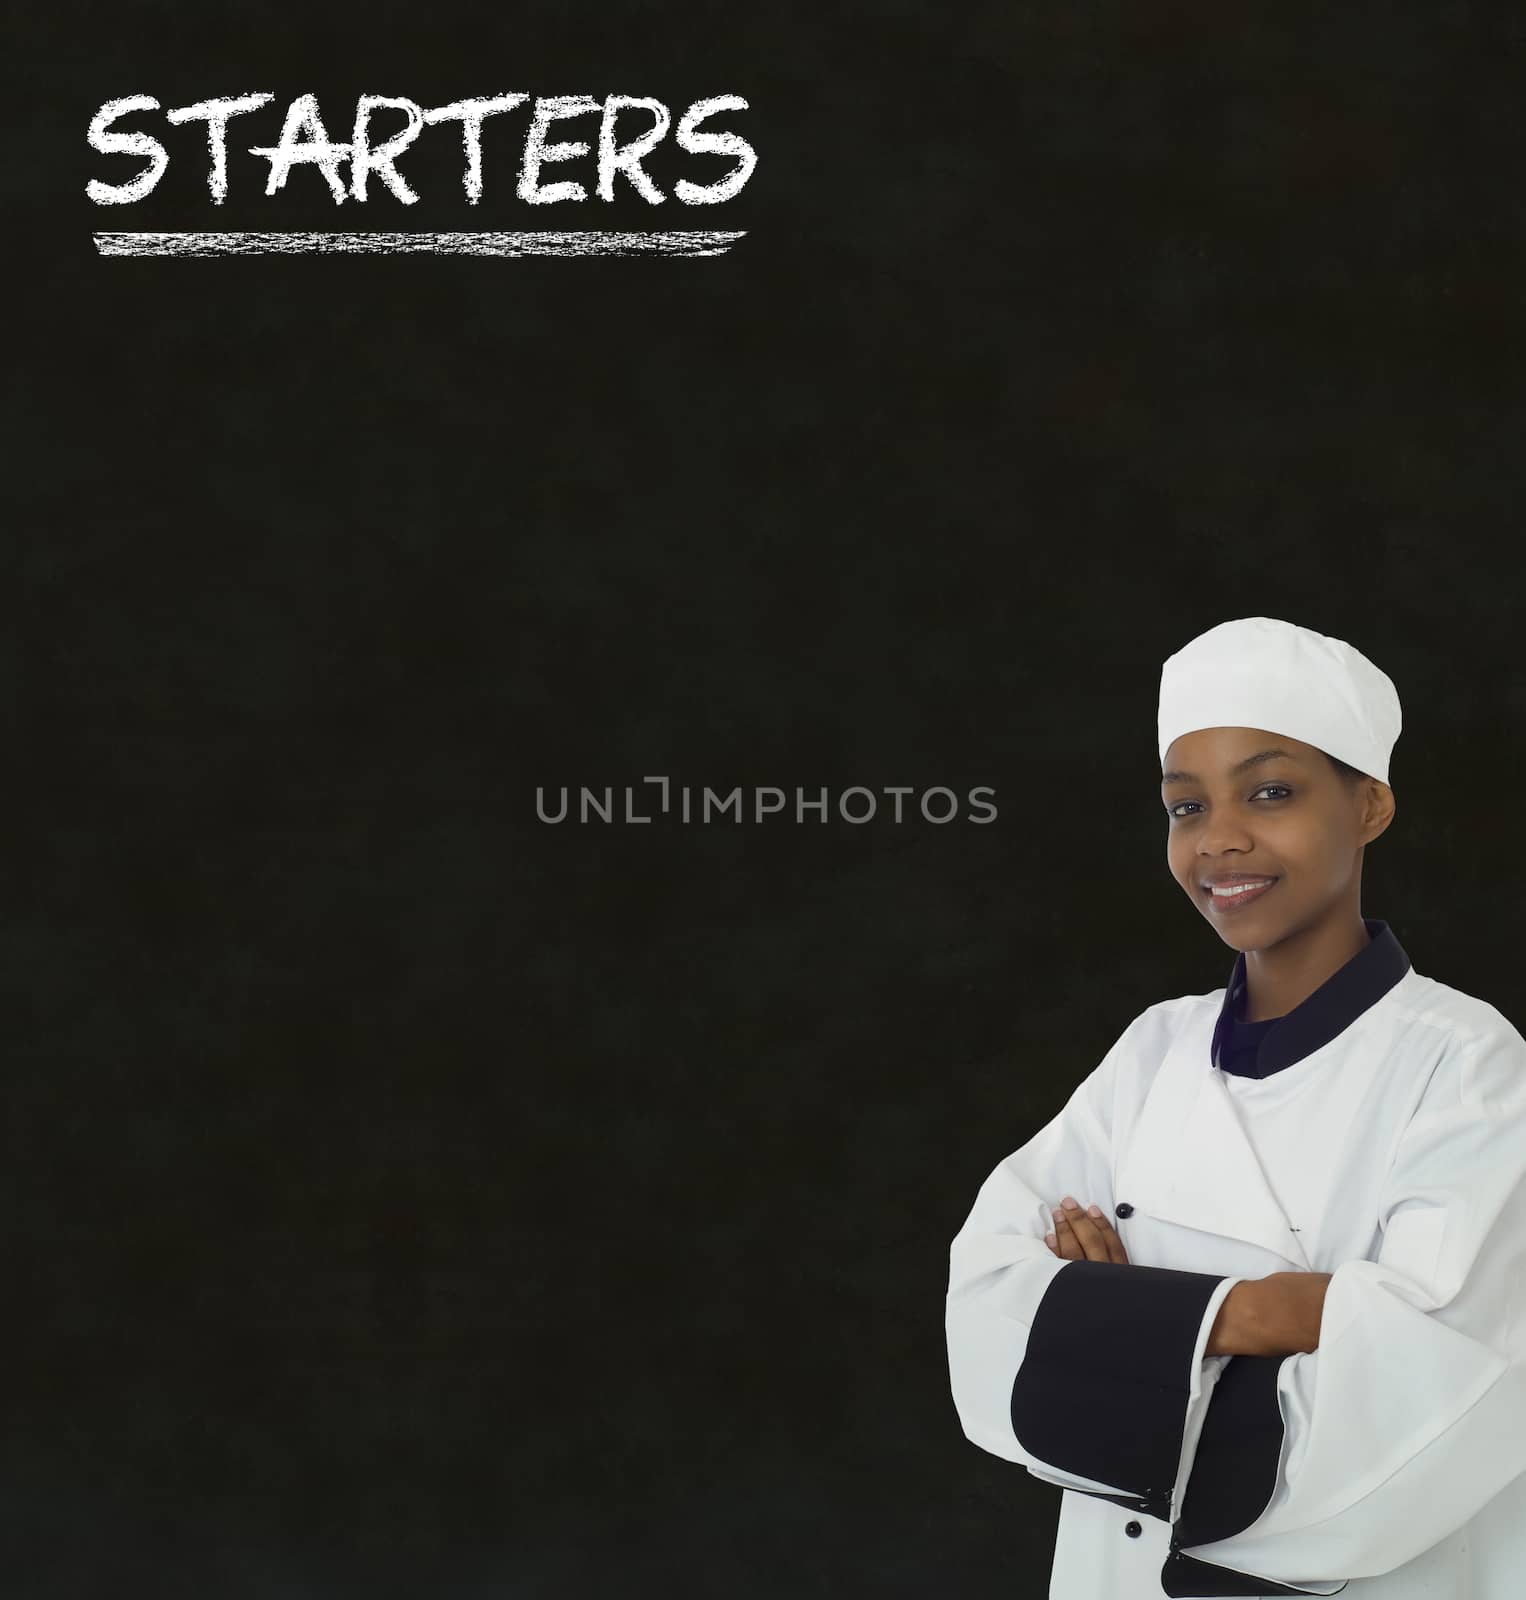 Chef with chalk starters sign on blackboard background by alistaircotton